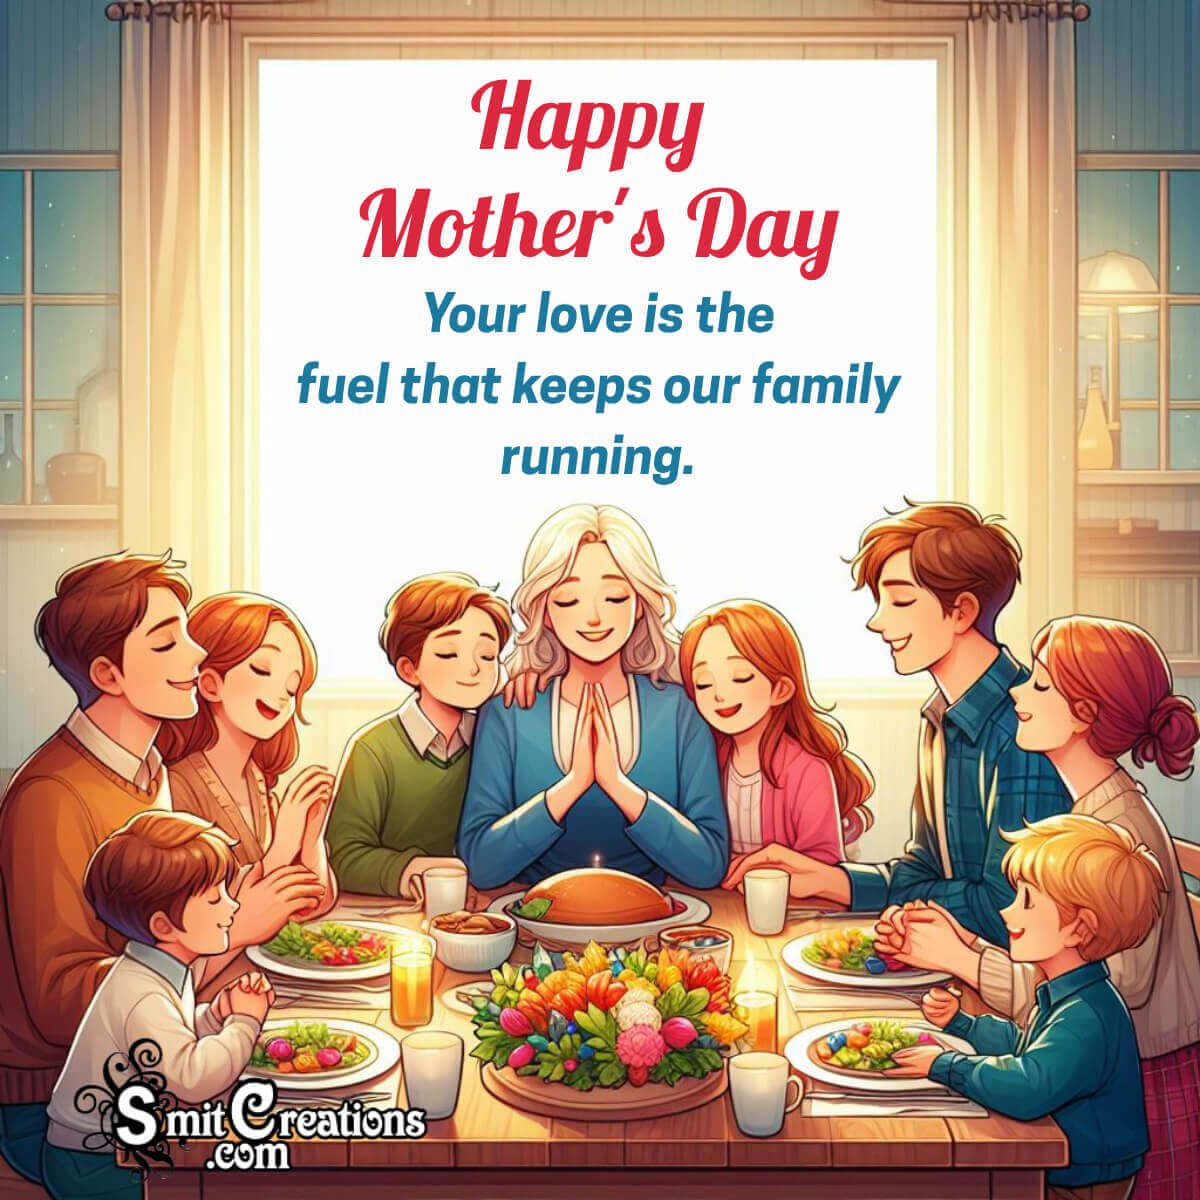 Happy Mother’s Day Message Photo